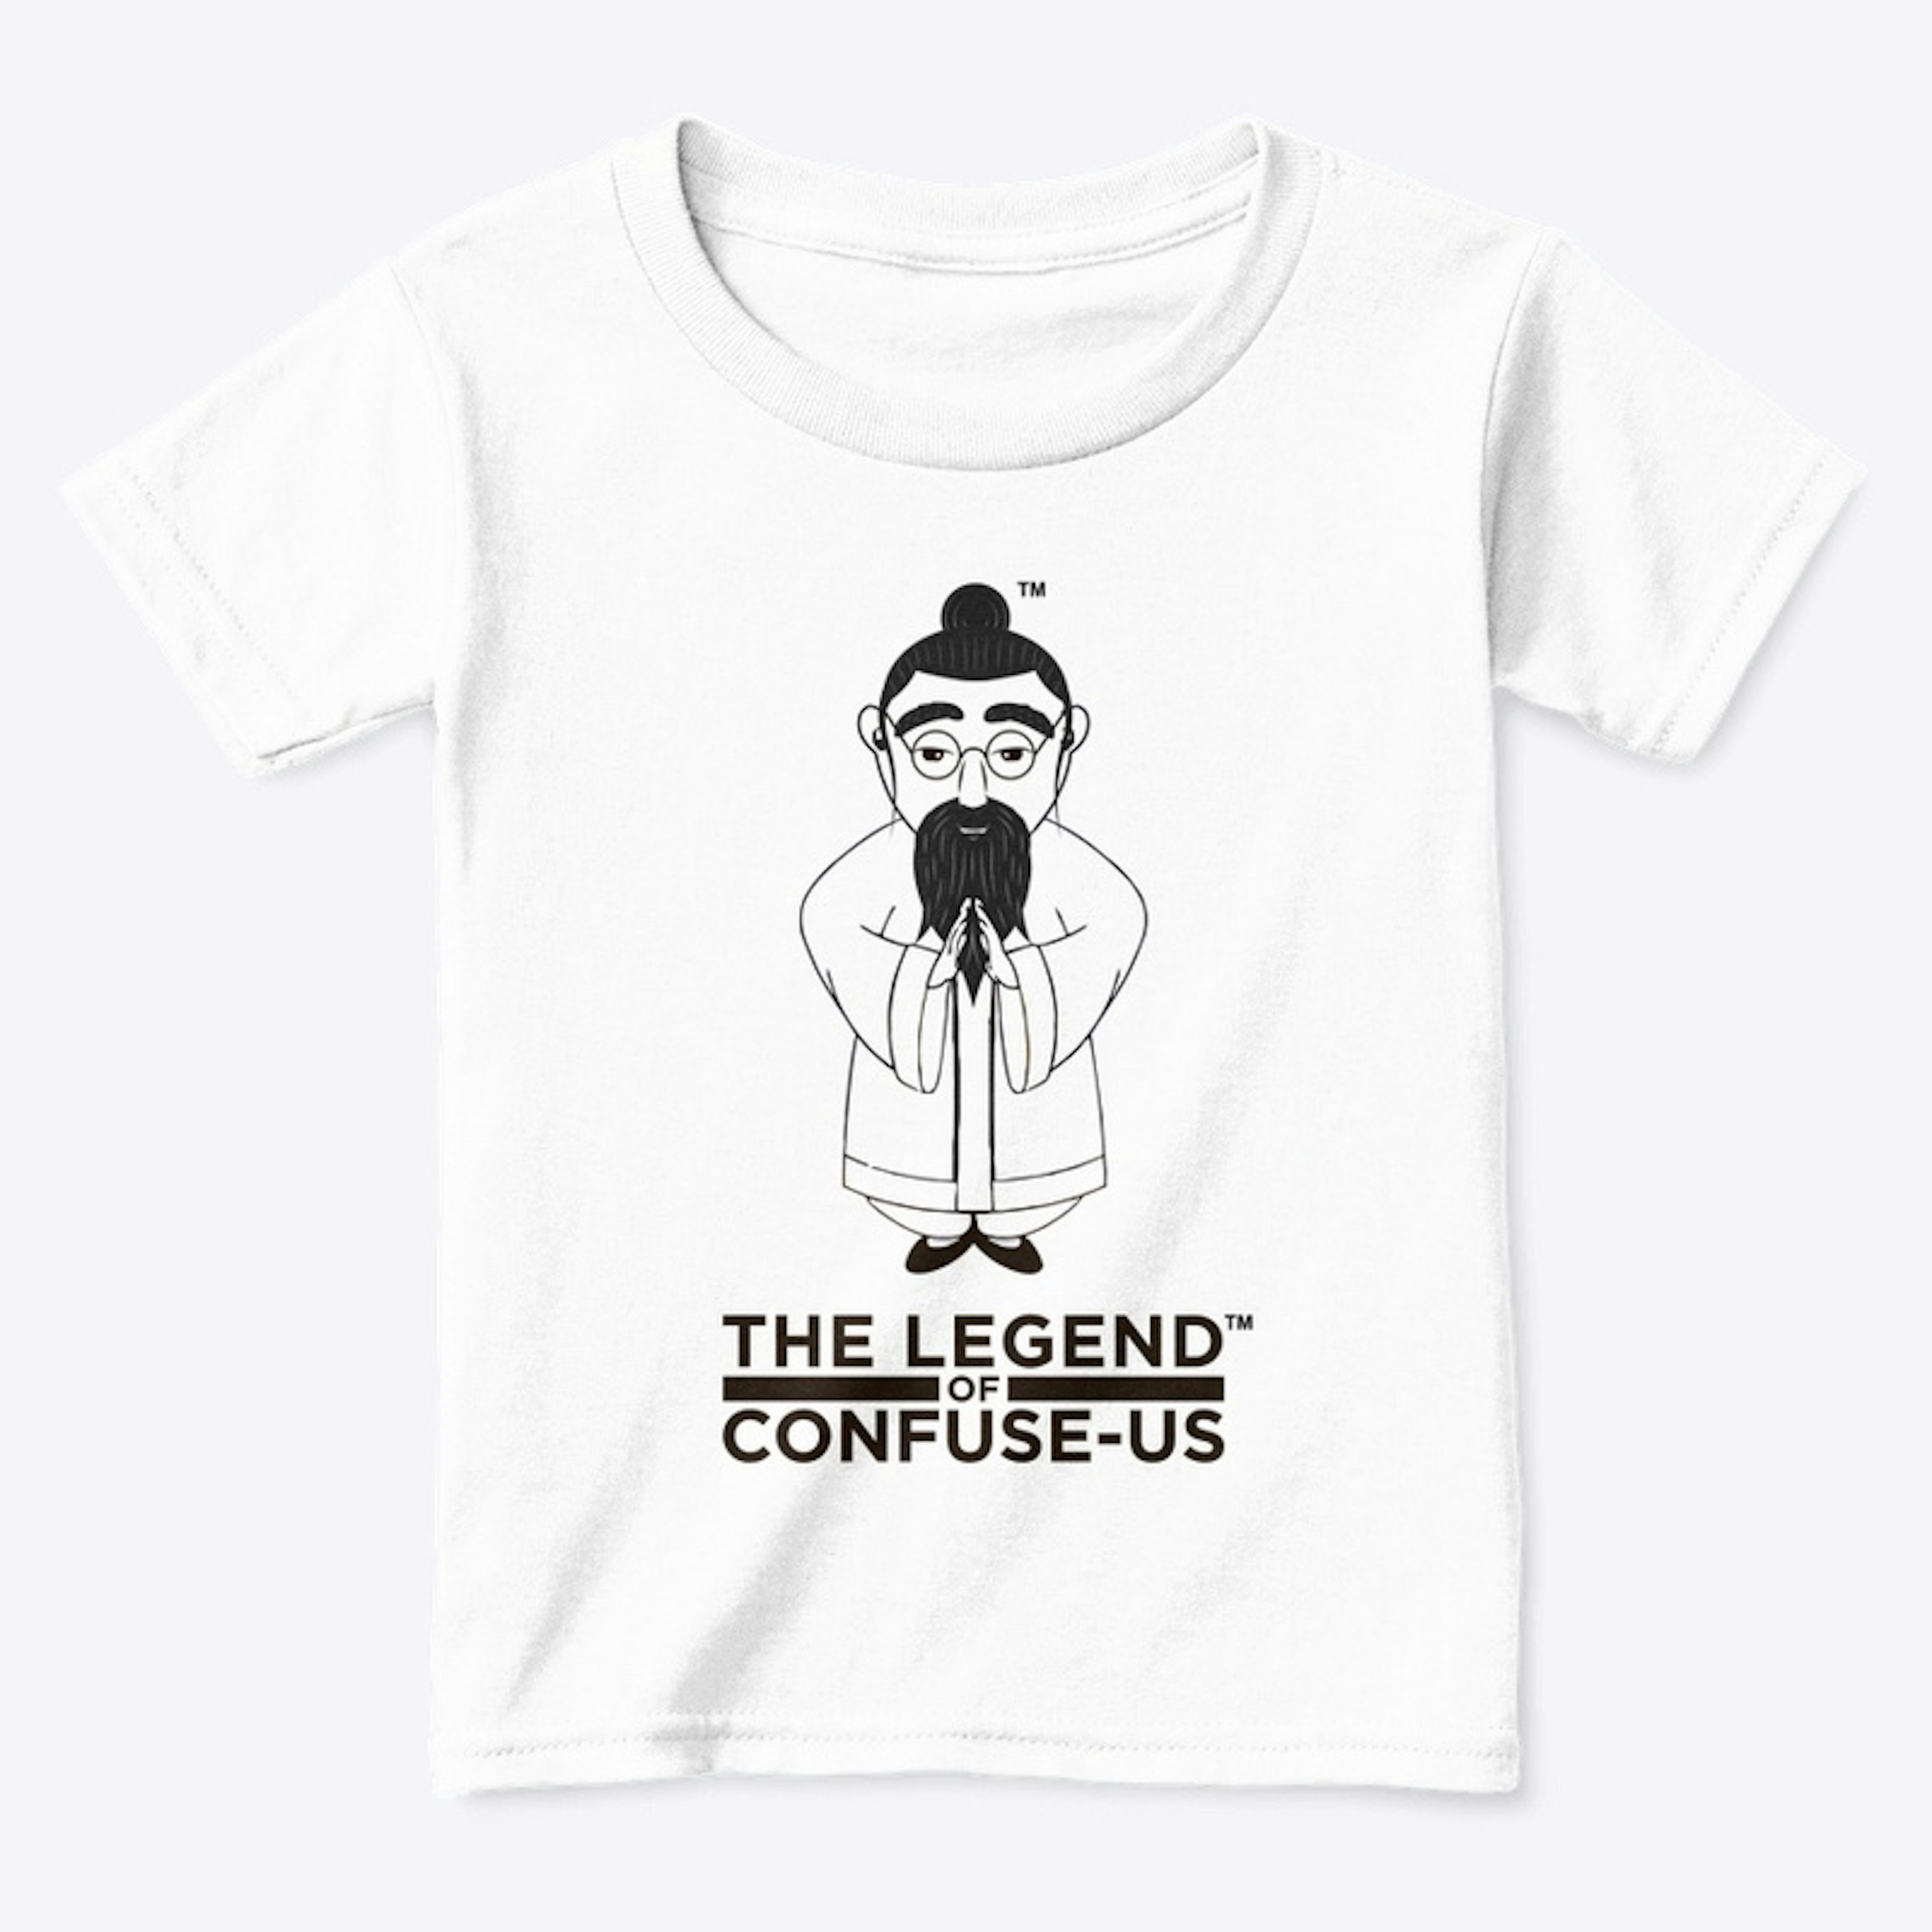 THE LEGEND OF CONFUSE-US Lives in B&W